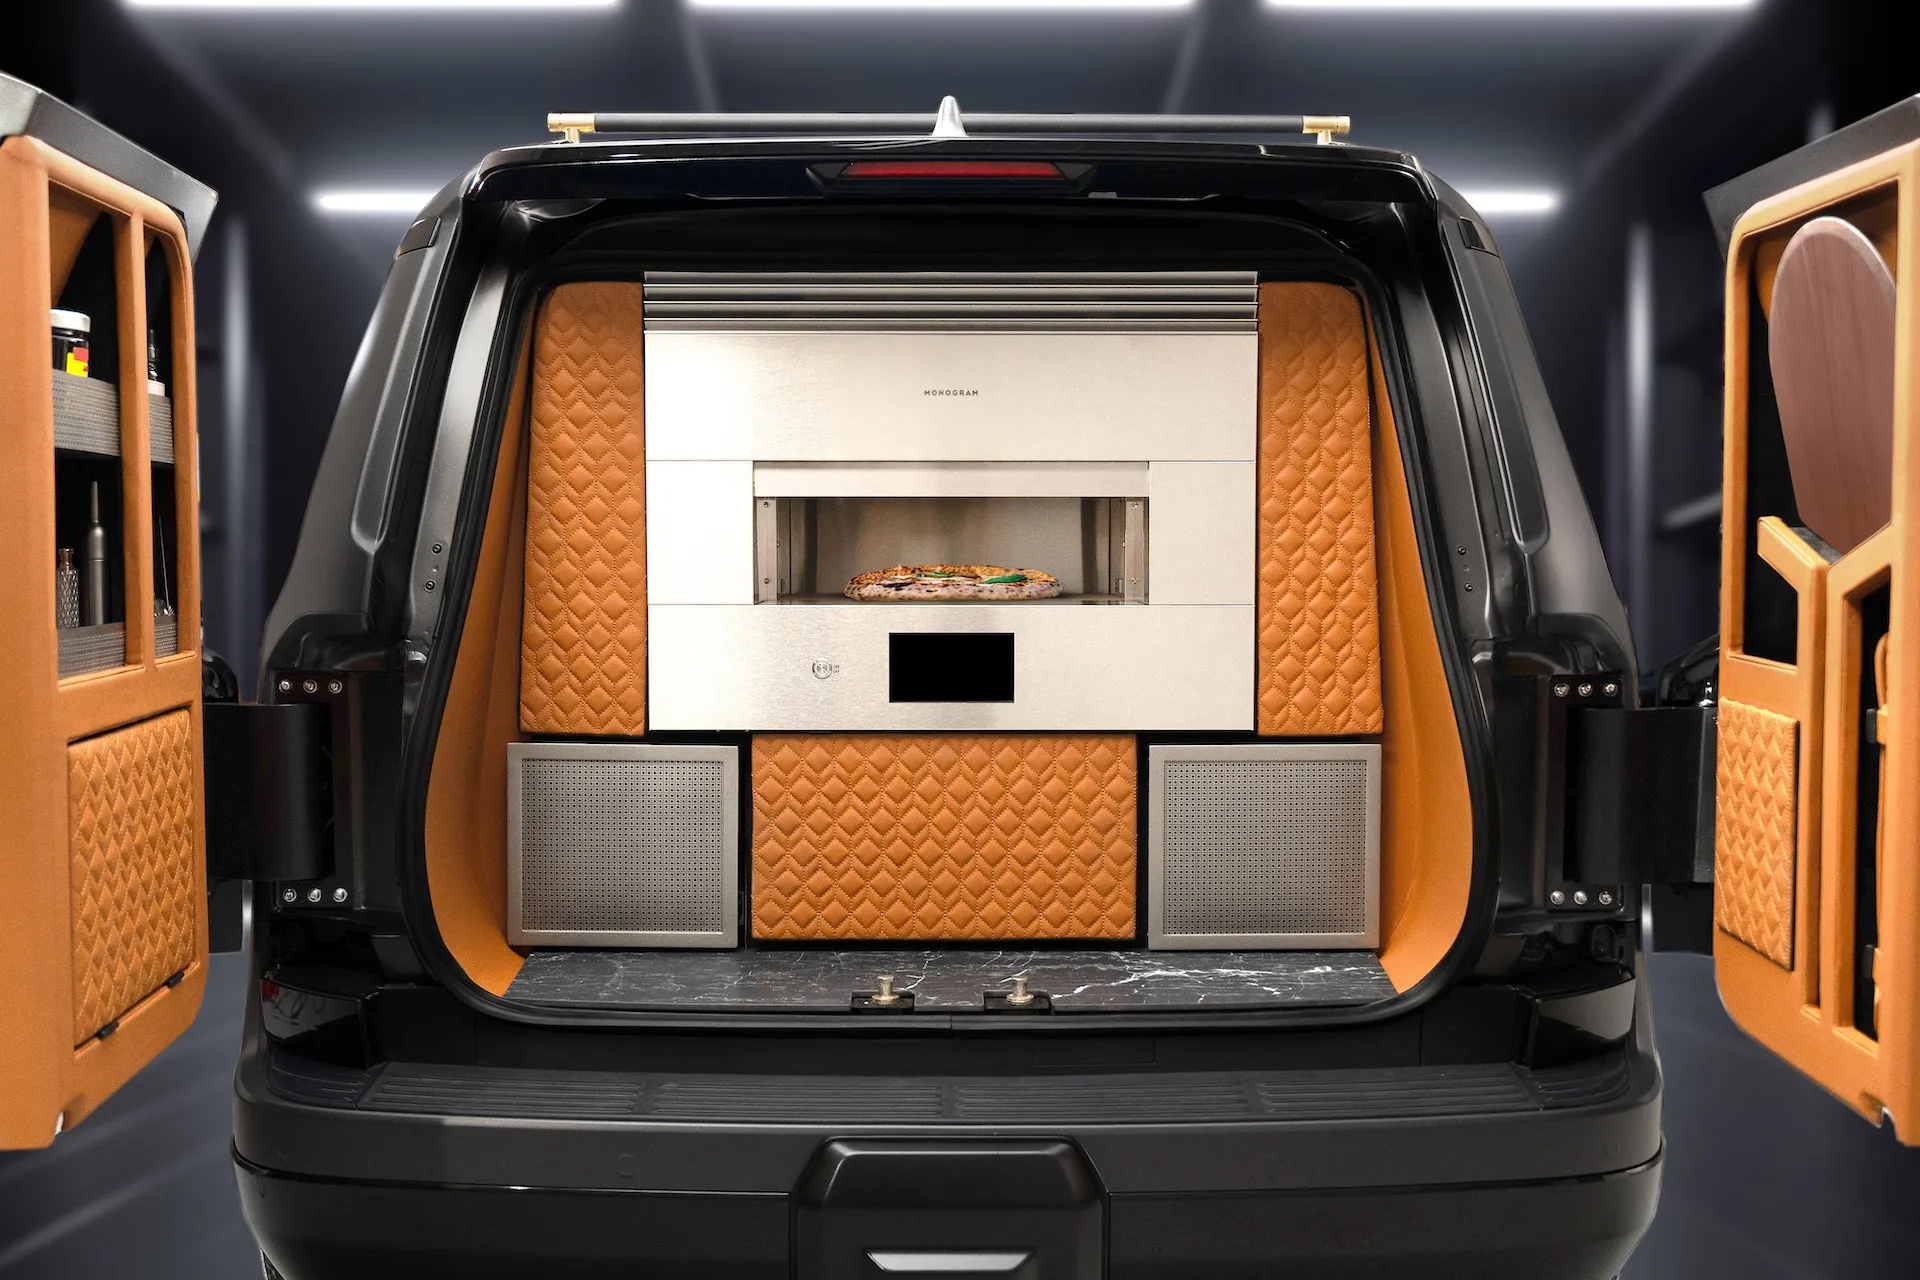 Mobile munchies? This Lexus GX has a pizza oven in back Auto Recent